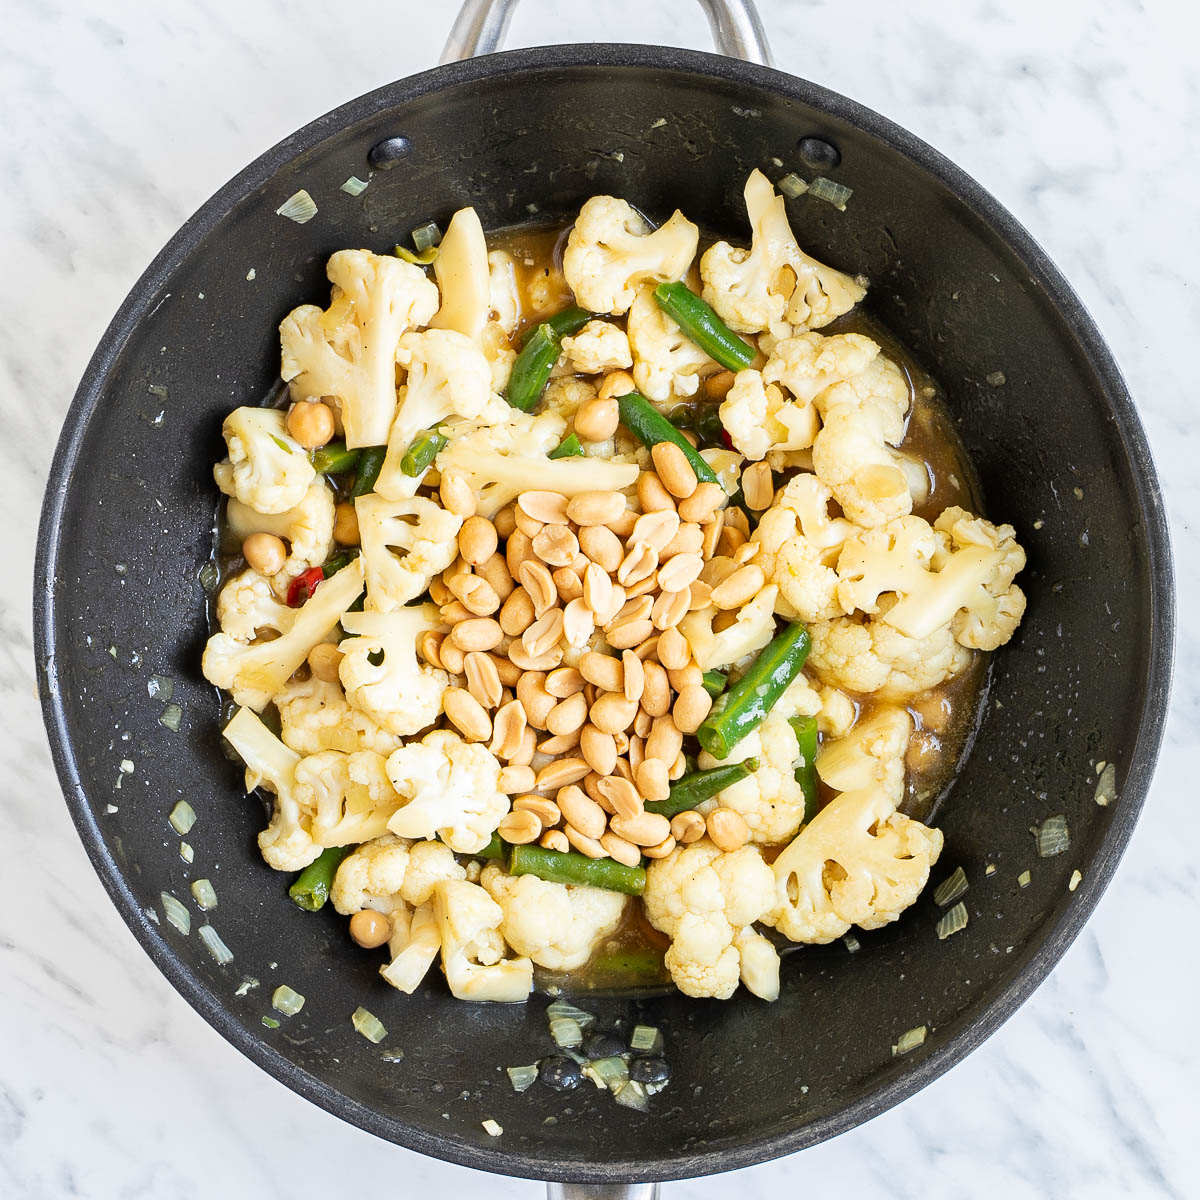 Wok with cauliflower florets, chickpeas, peanuts and green beans in a light brown sauce